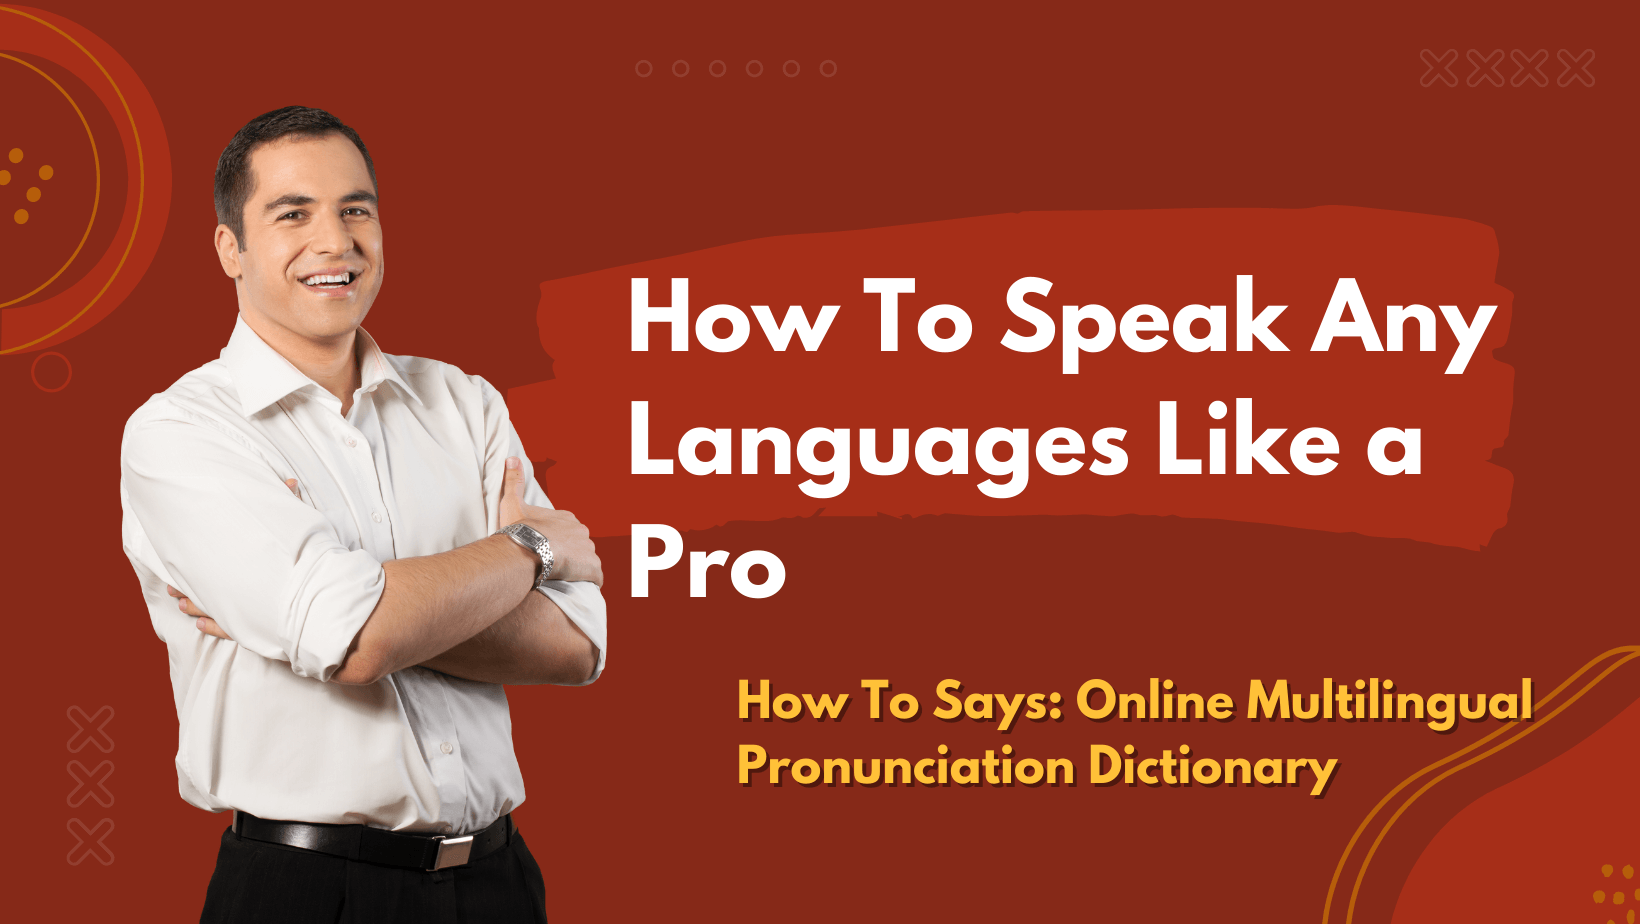 How To Speak Any Languages Like a Pro